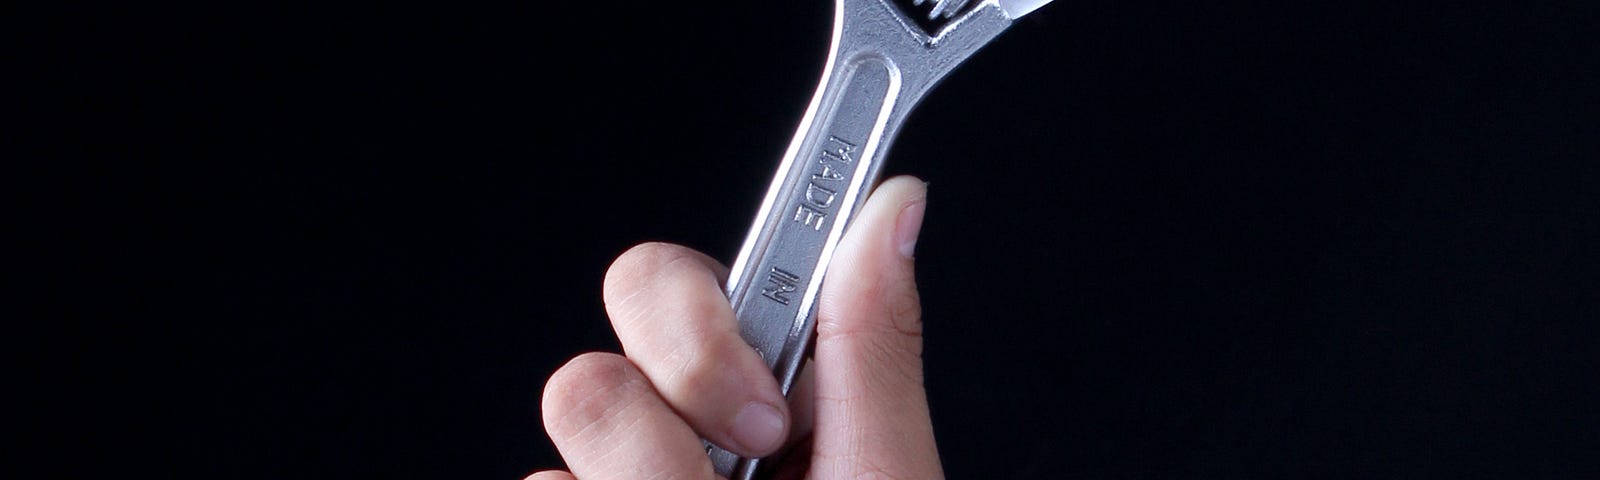 Man’s hand holding up a wrench, against a black background.